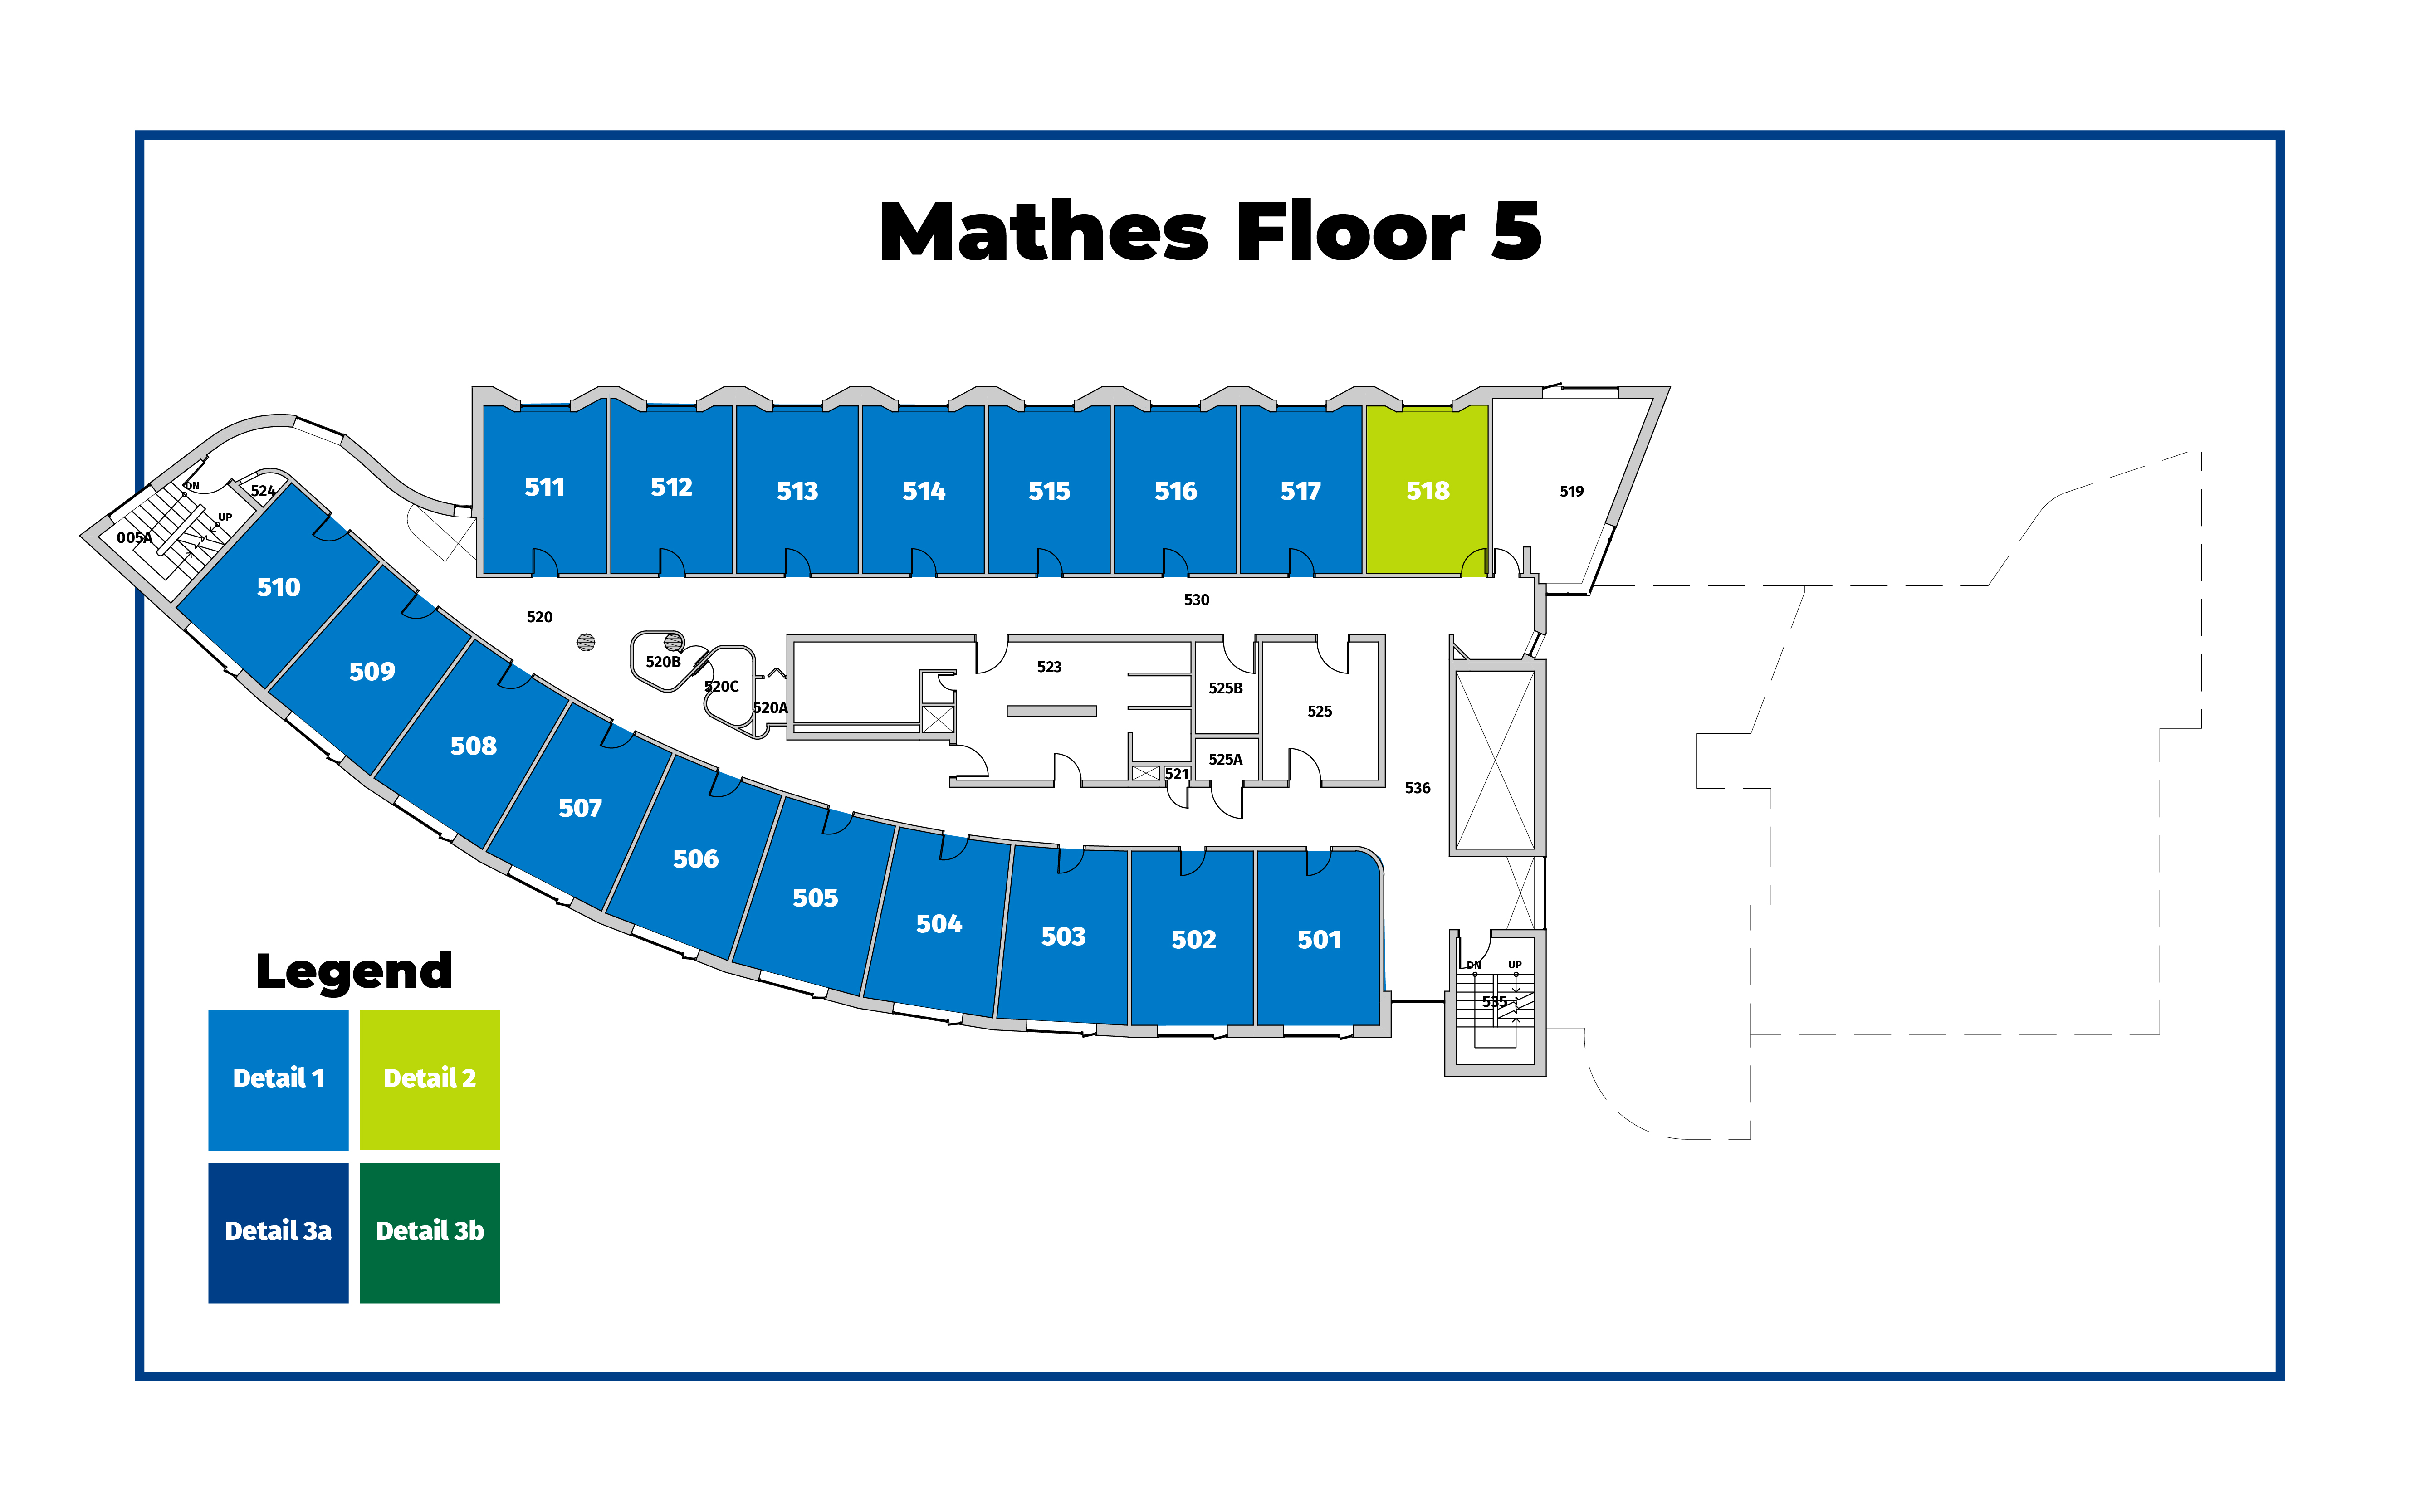 Floor Plan of Mathes Hall 